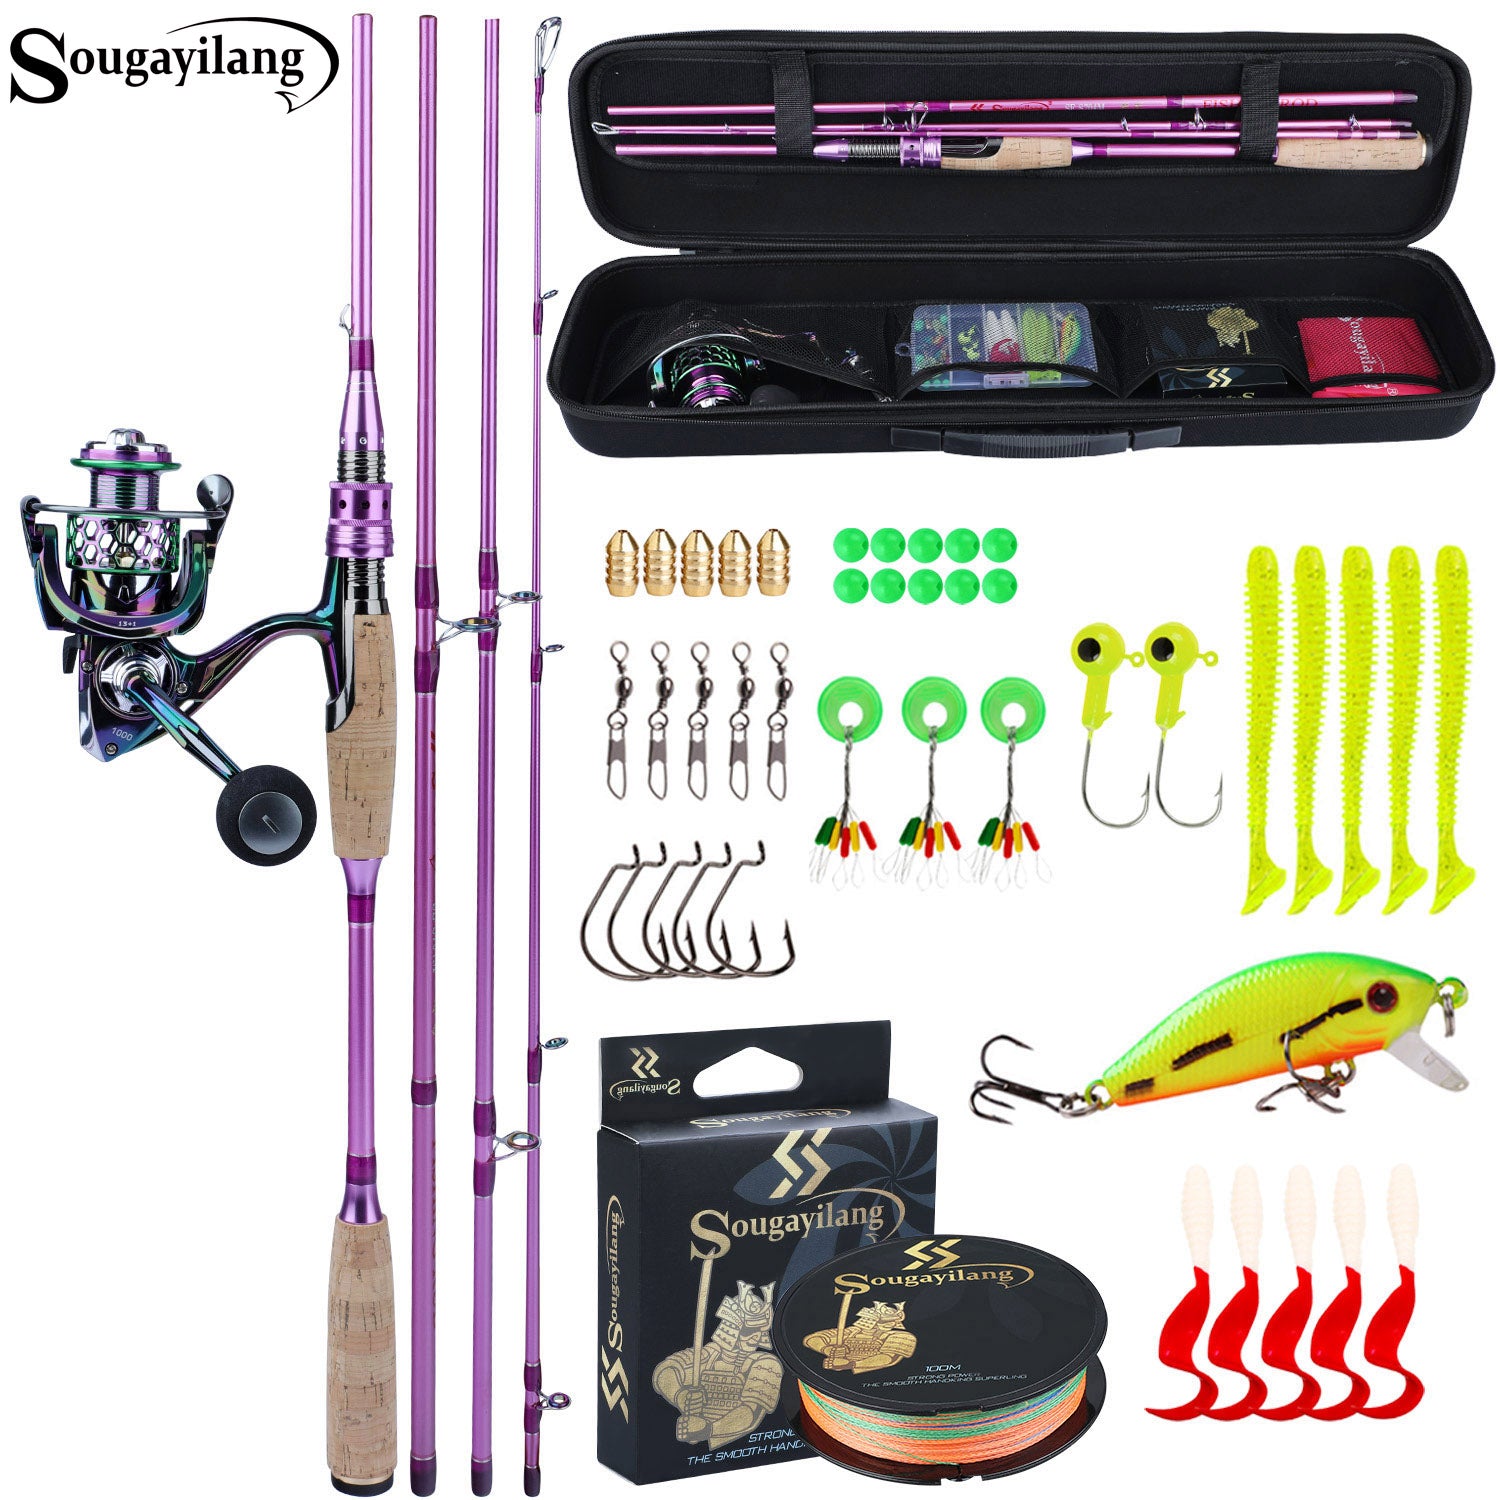 Sougayilang Fishing Rod Reel Combos Carbon Fiber Telescopic Fishing Pole with Spinning Reel for Travel Saltwater Freshwater Fishing